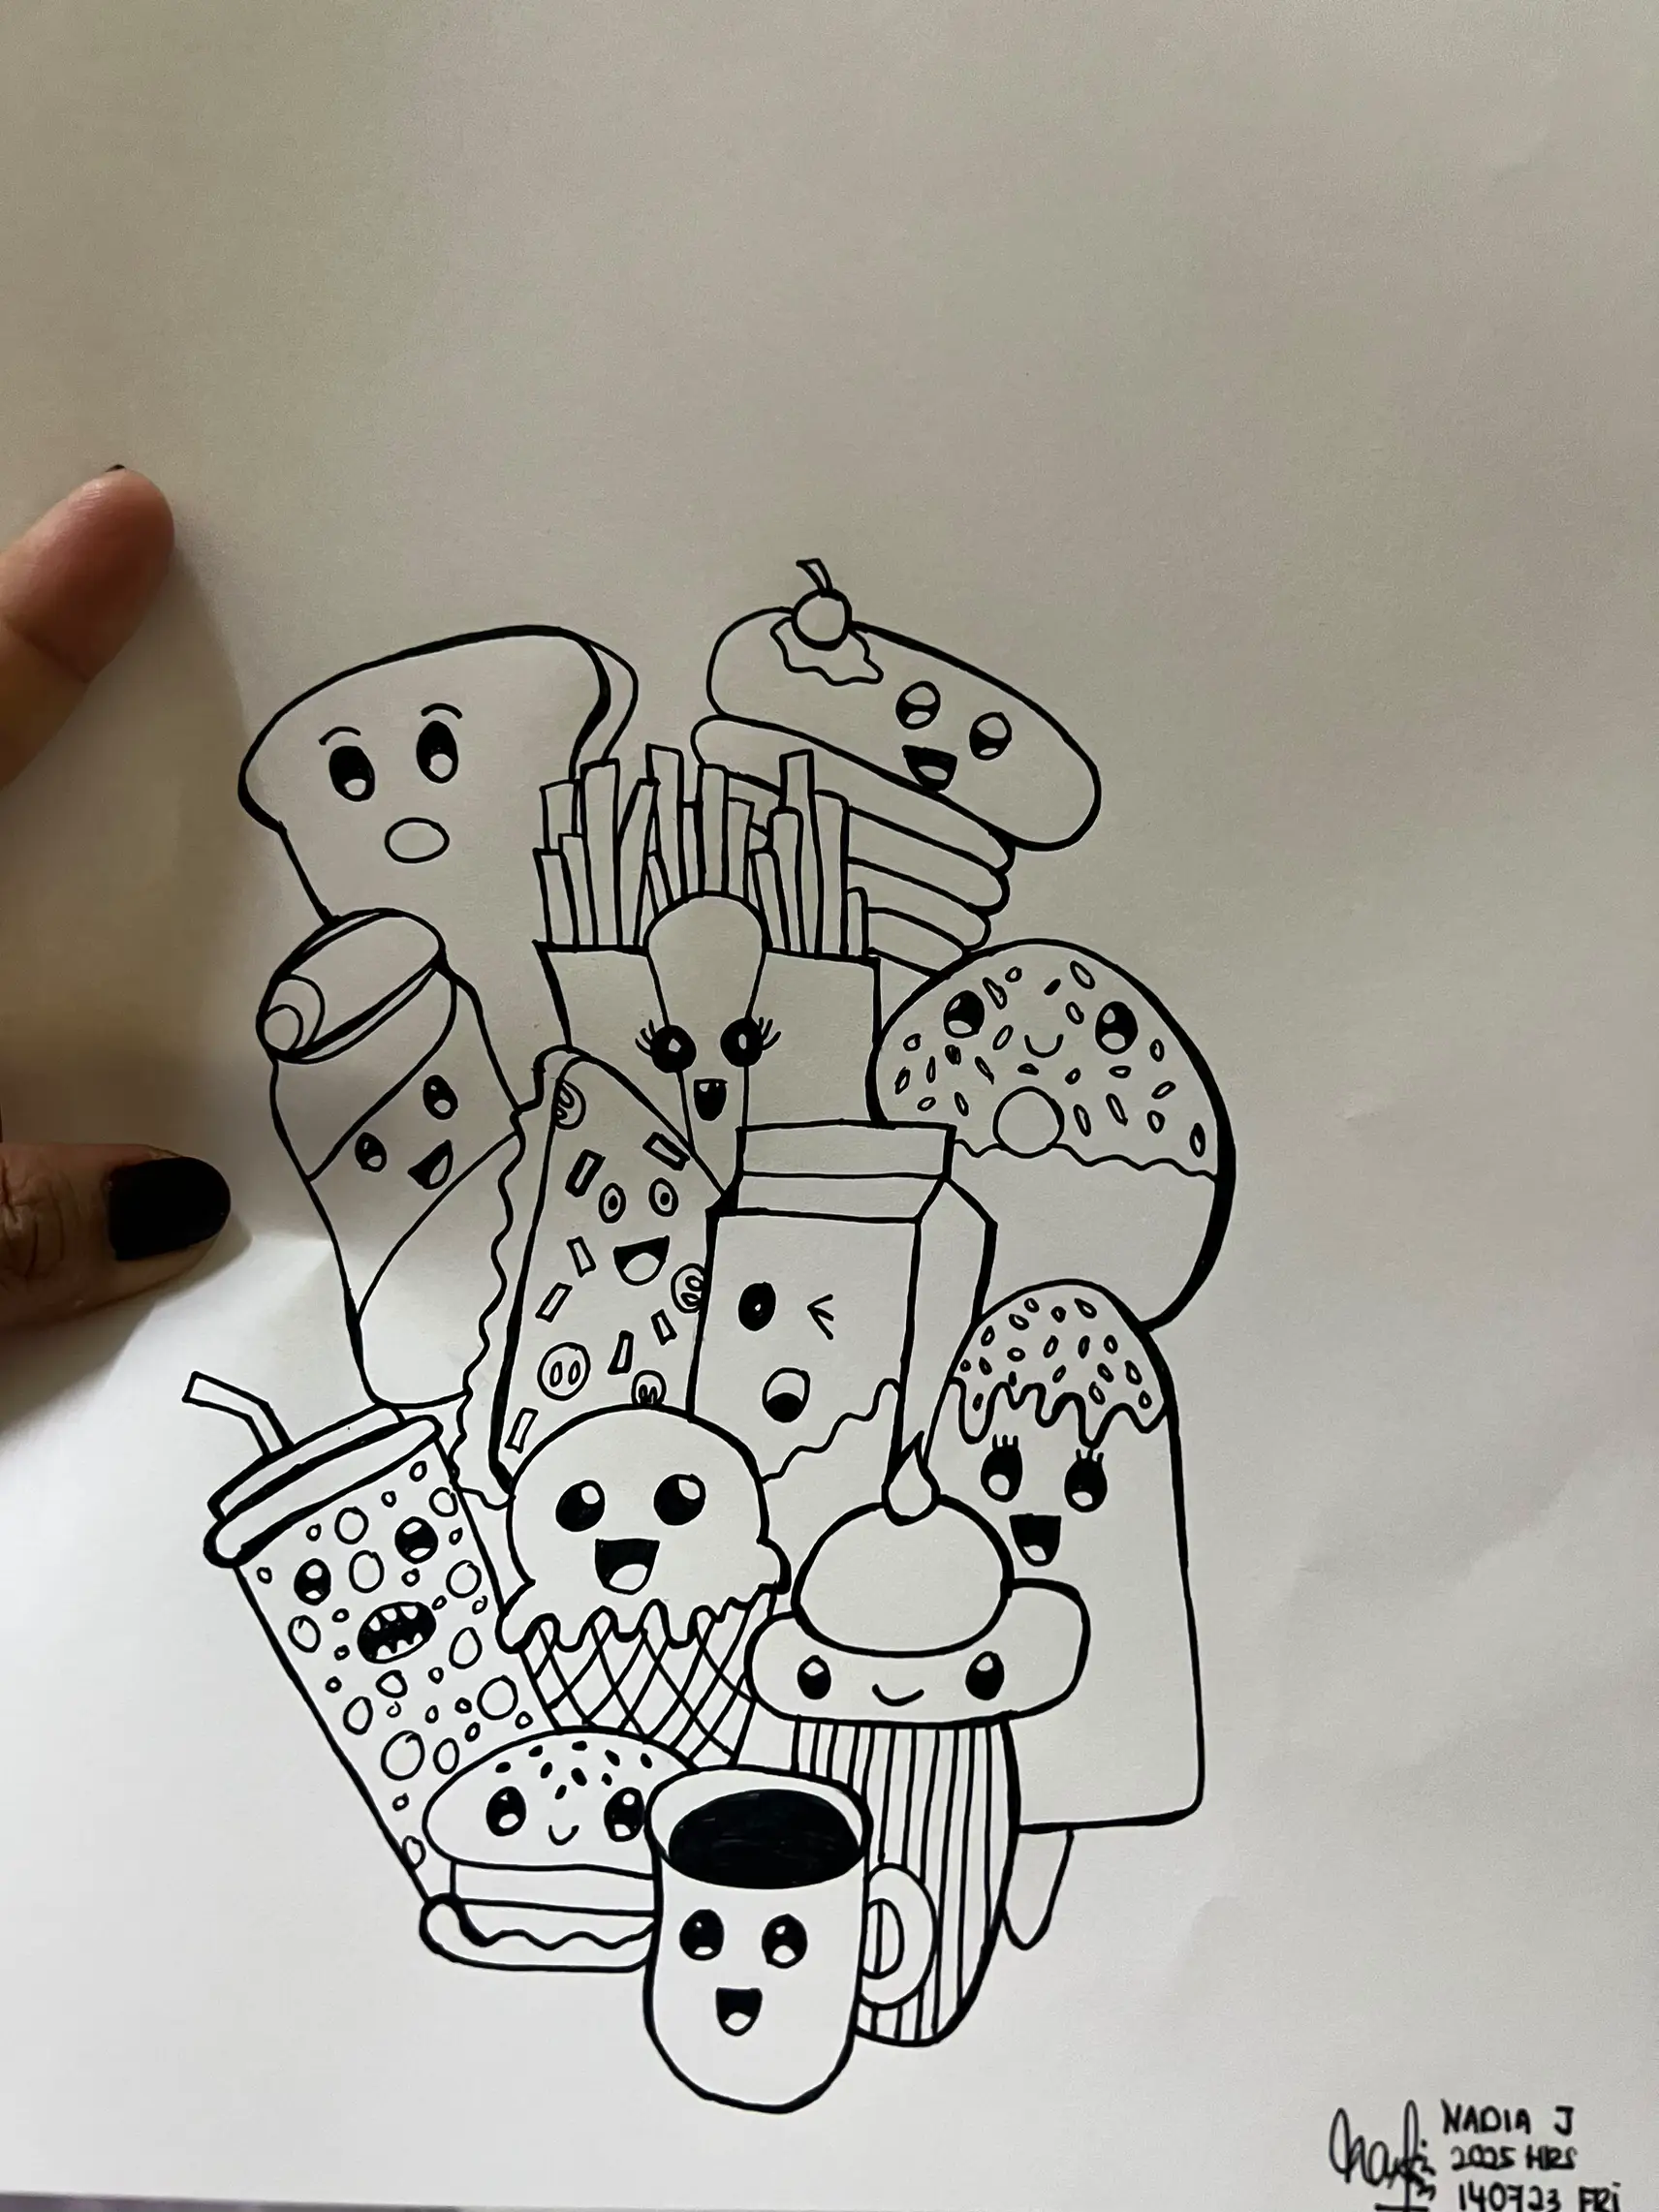 Doodle art, Gallery posted by NadiaJ